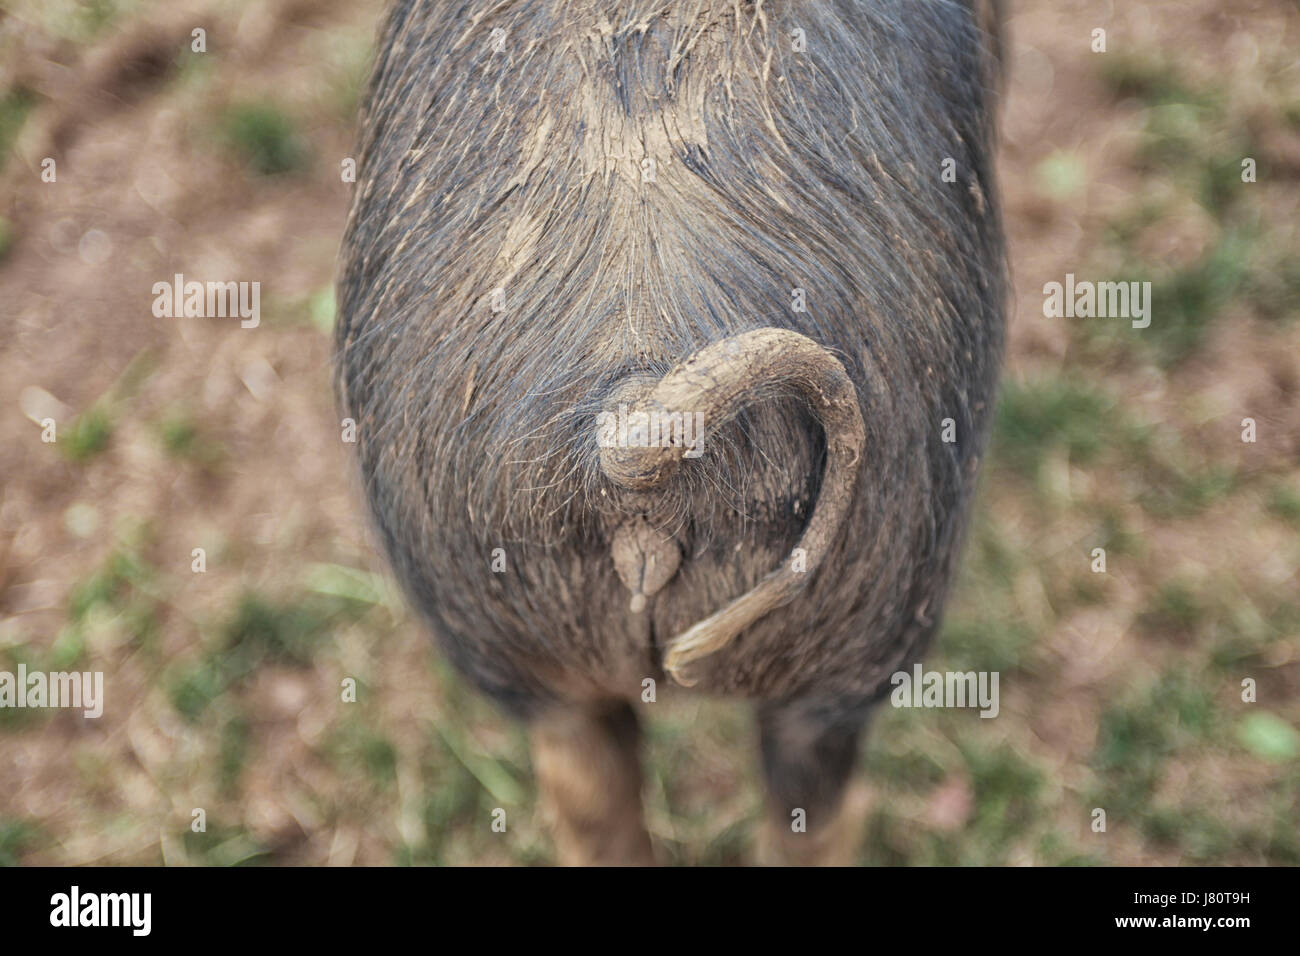 Happy pig with curly tail Stock Photo